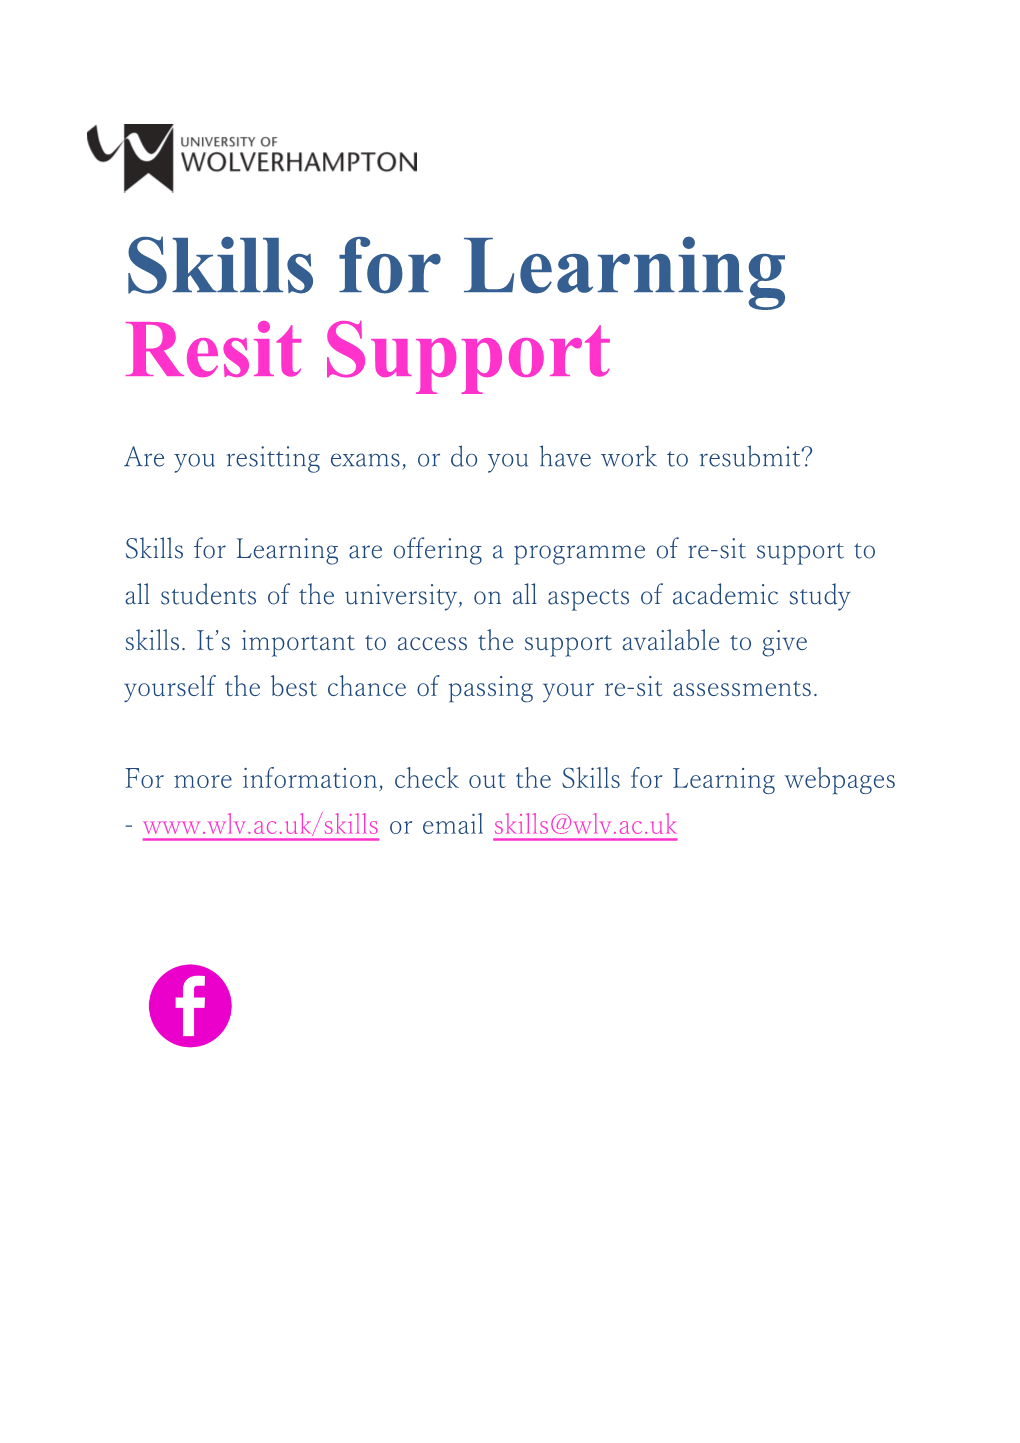 Skills for Learning Resit Support